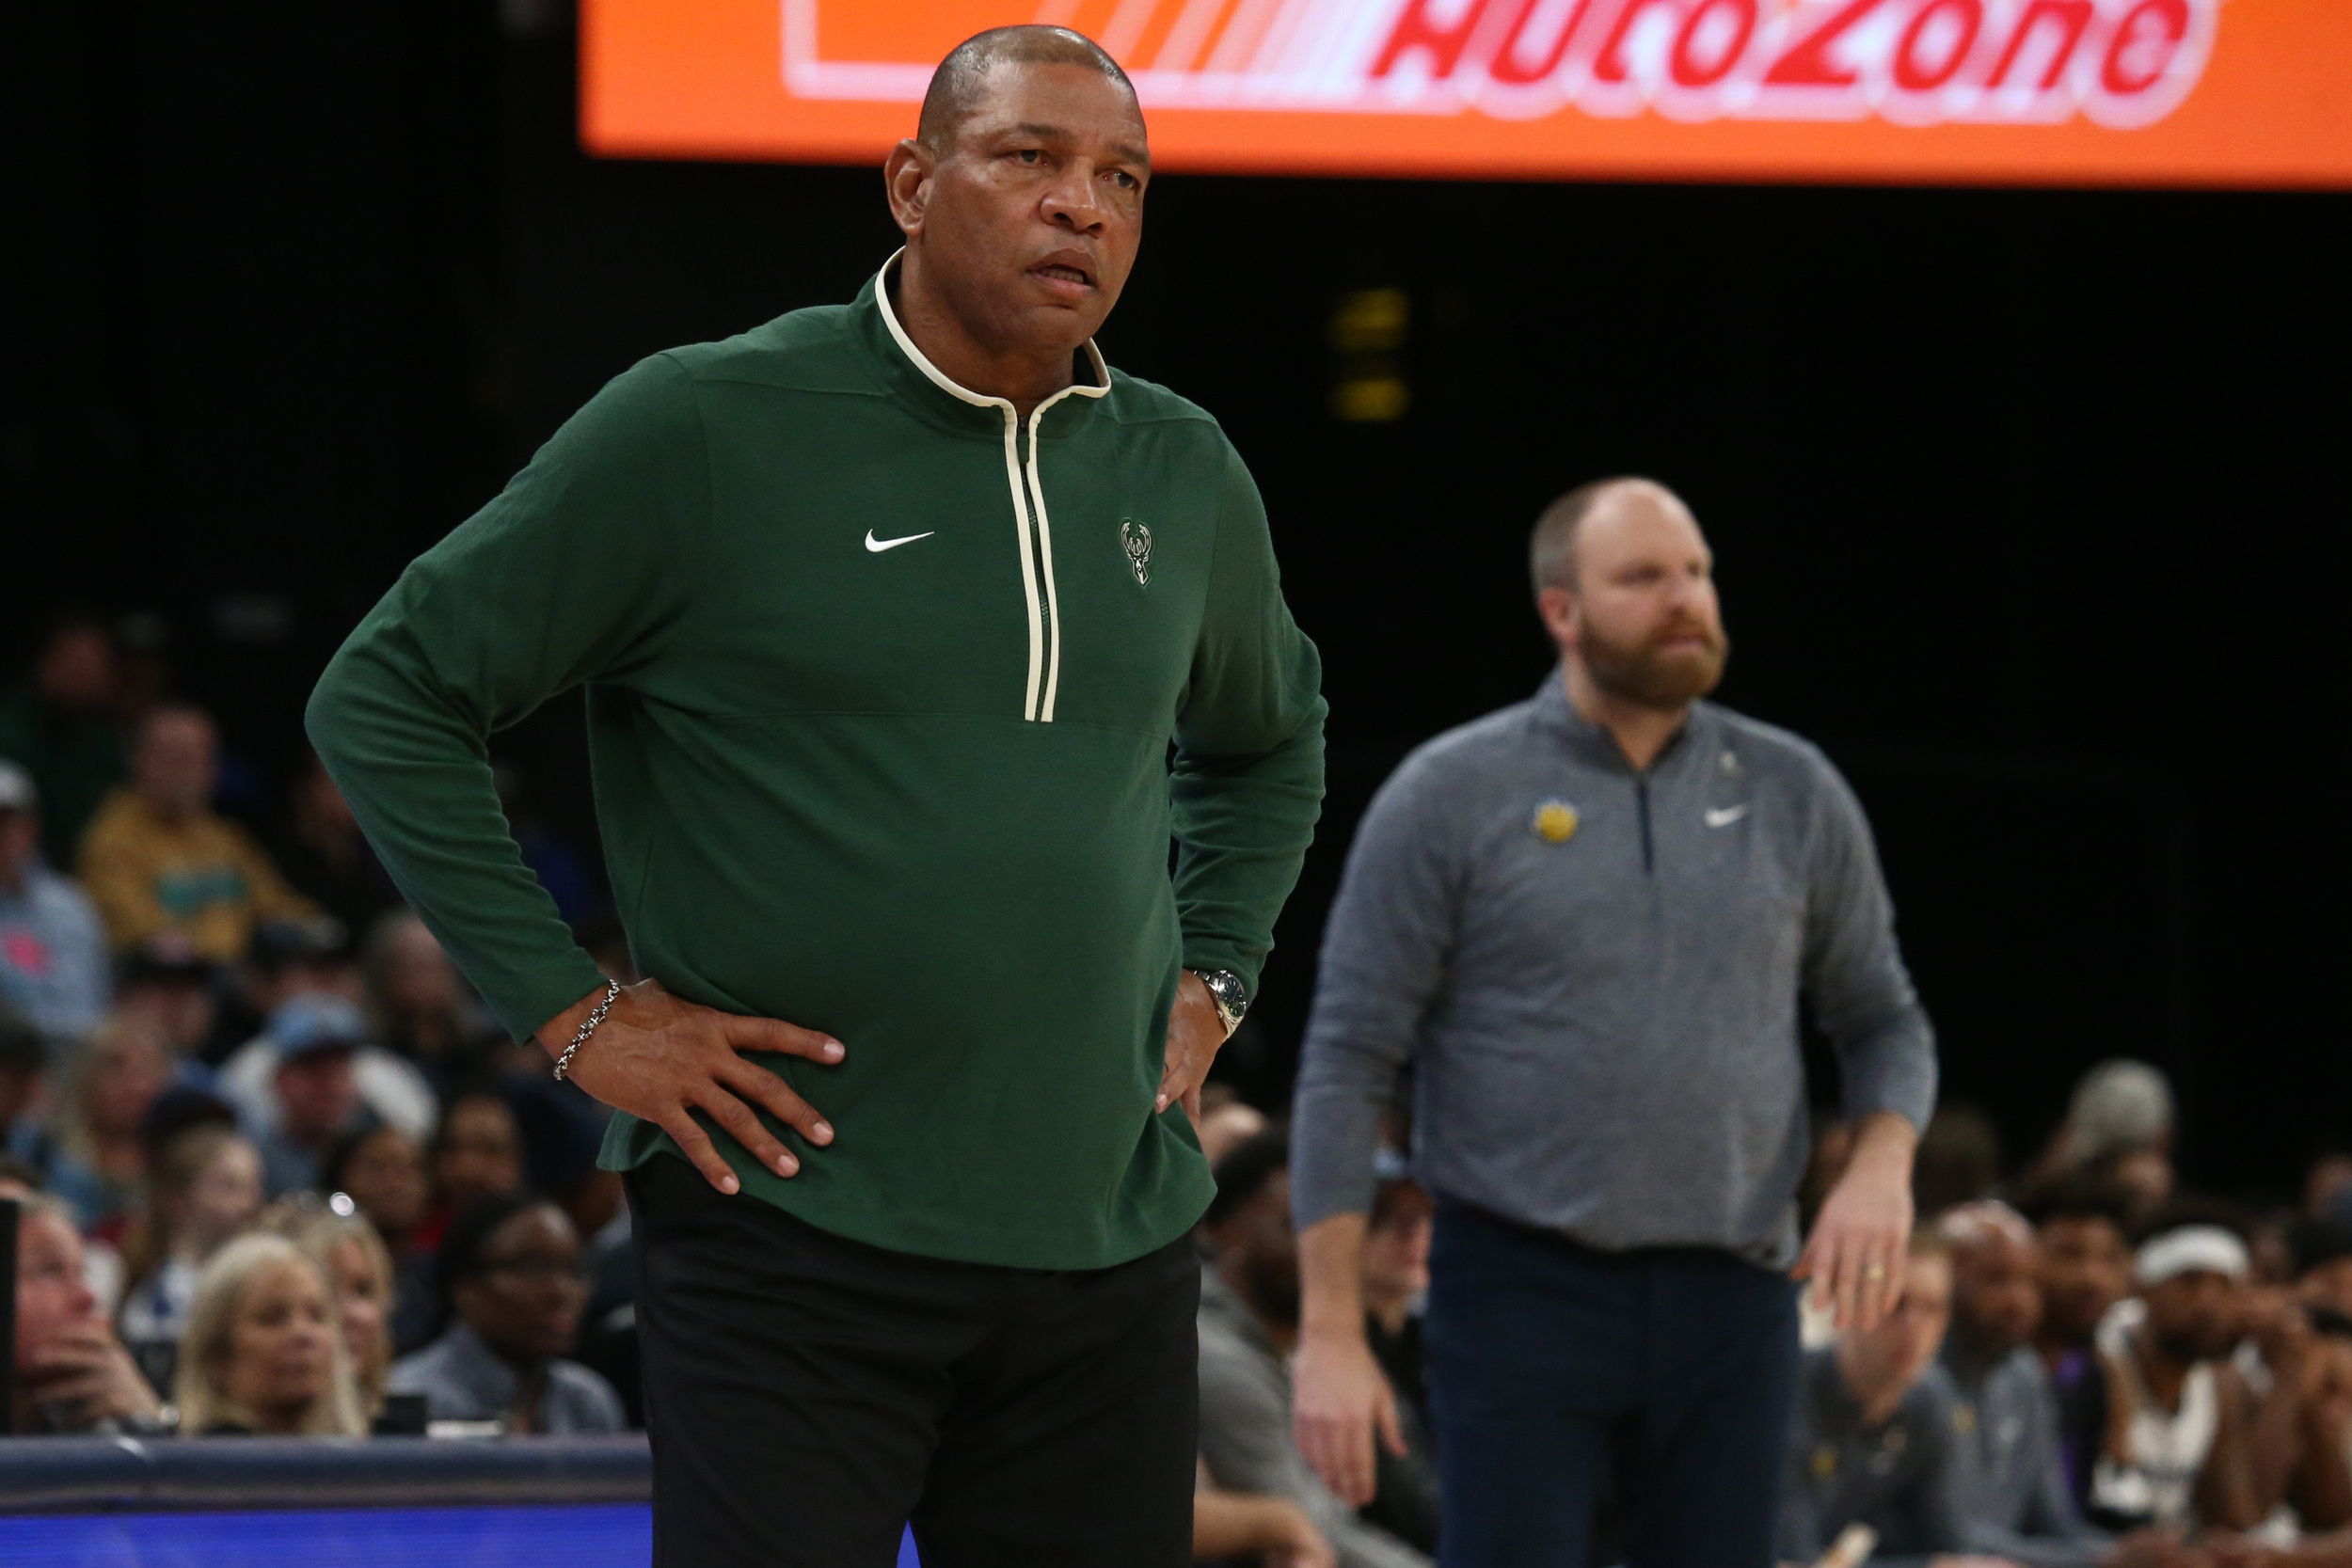 doc rivers attempts to distance himself from bucks' poor play with latest comments